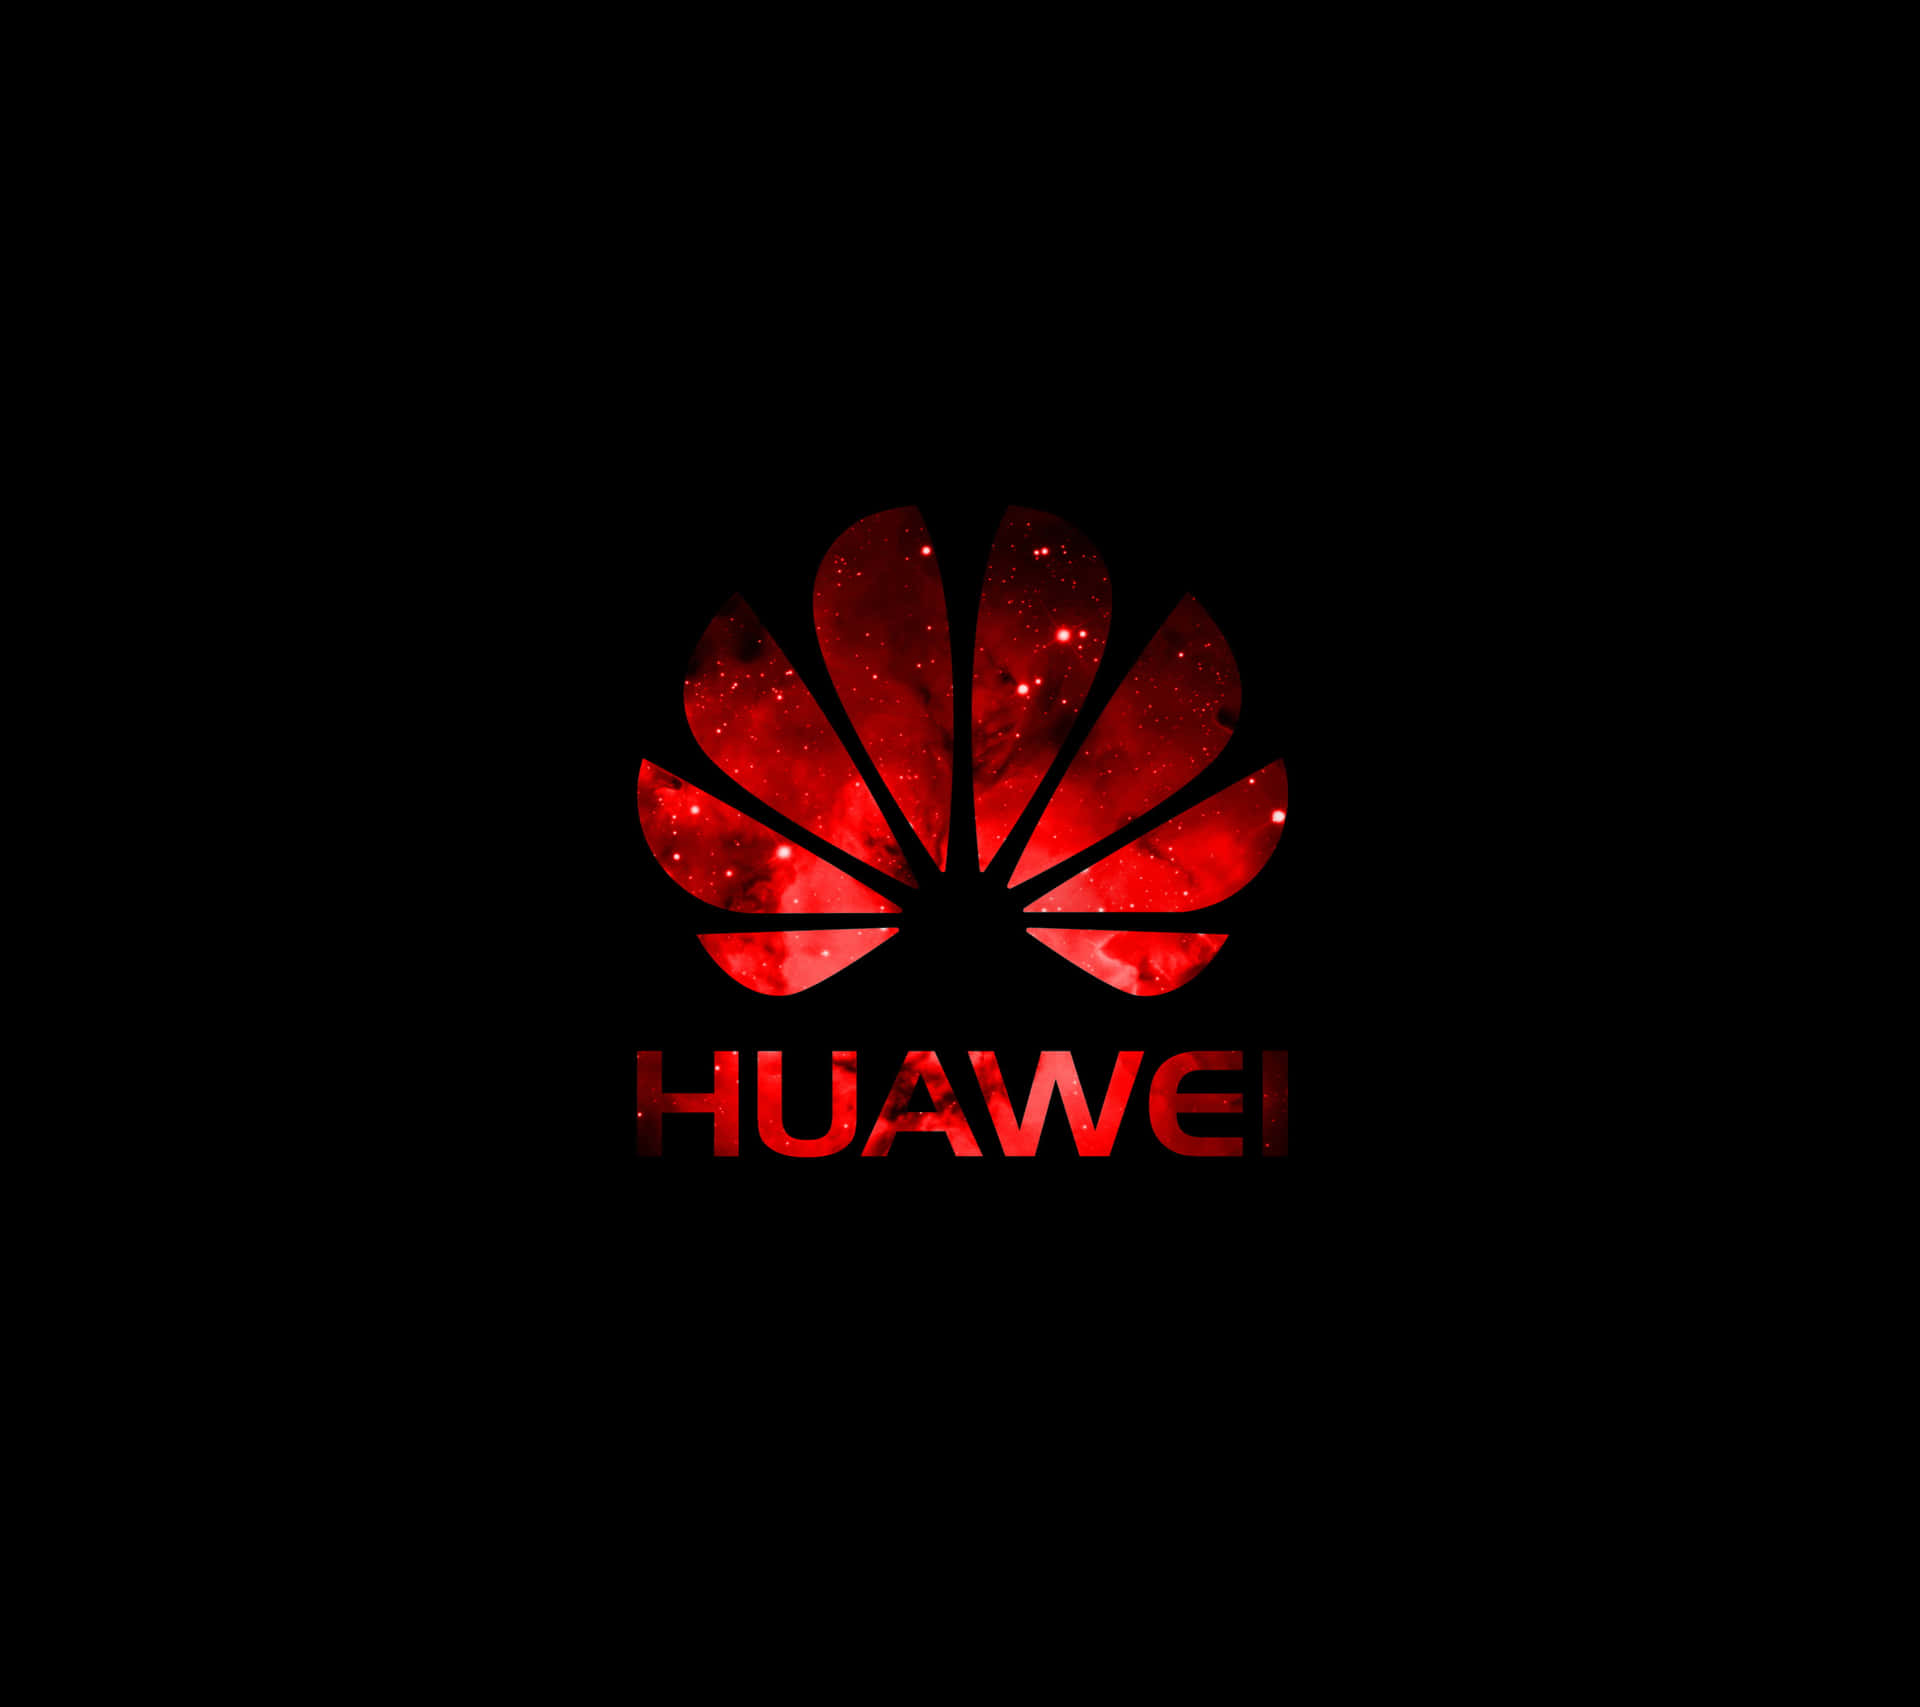 Embrace the modern technology with Huawei